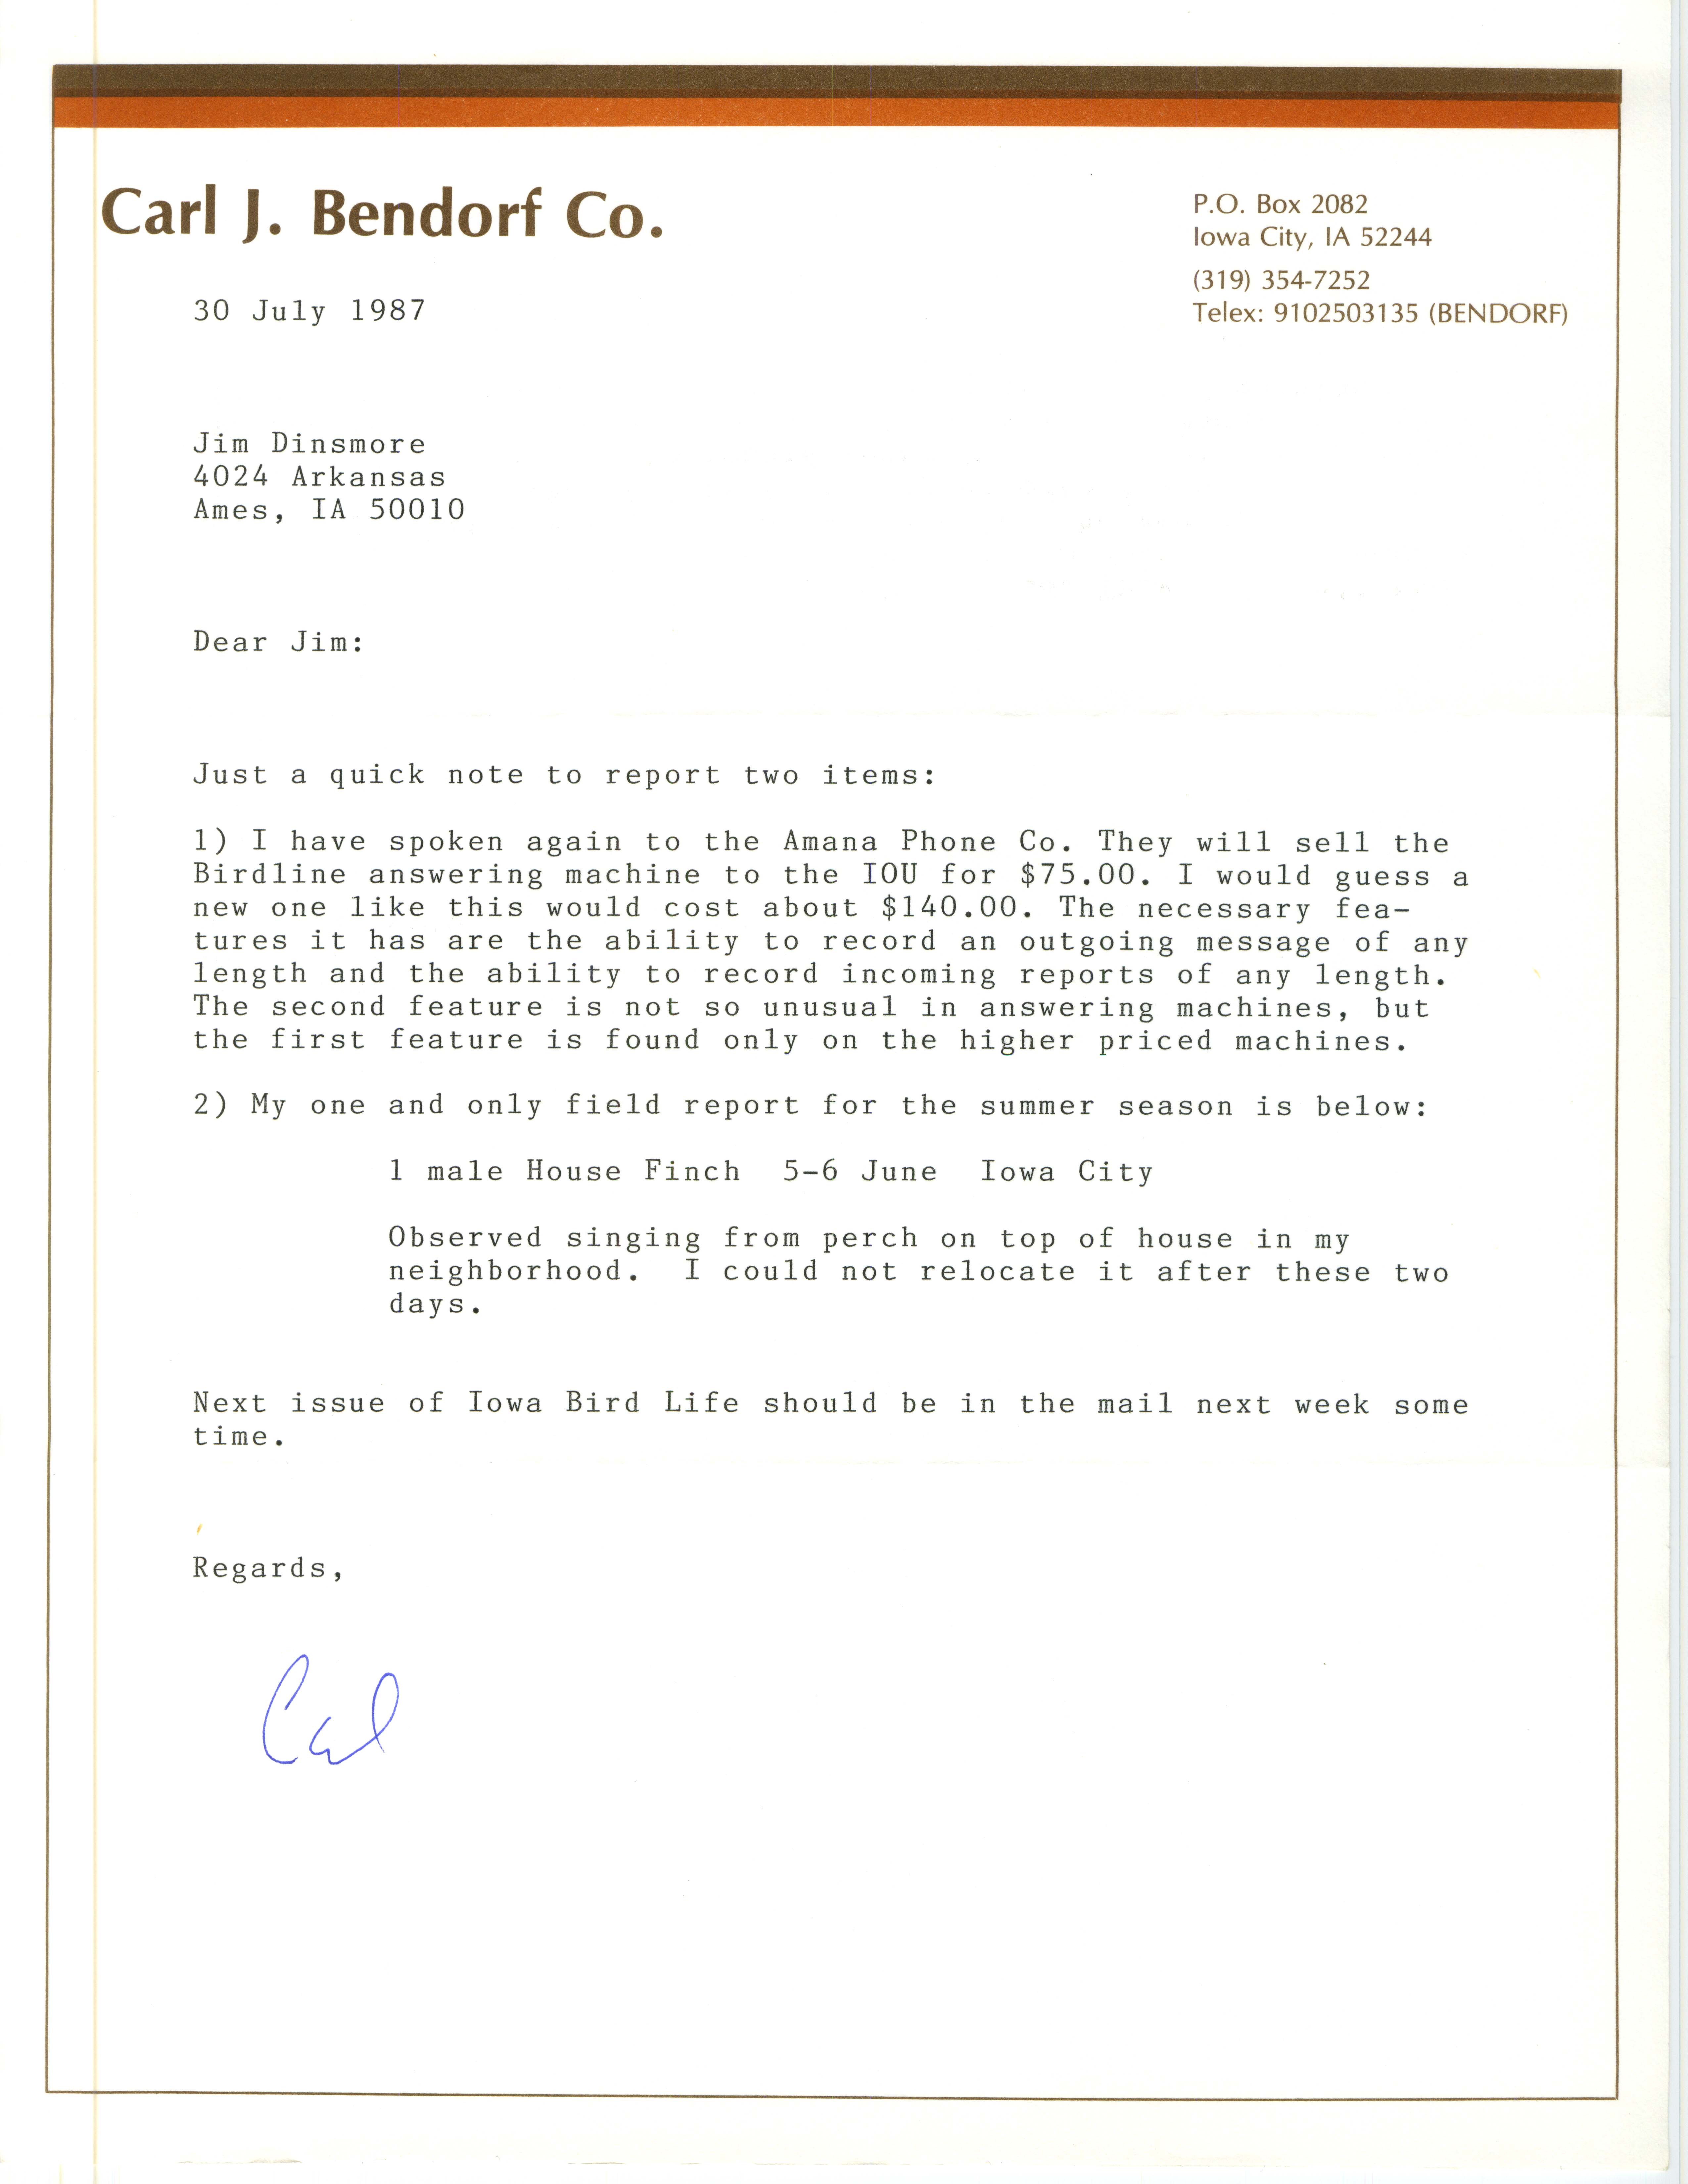 Carl J. Bendorf letter to James J. Dinsmore regarding the Birdline answering machine and a sighting of a House Finch, July 30, 1987